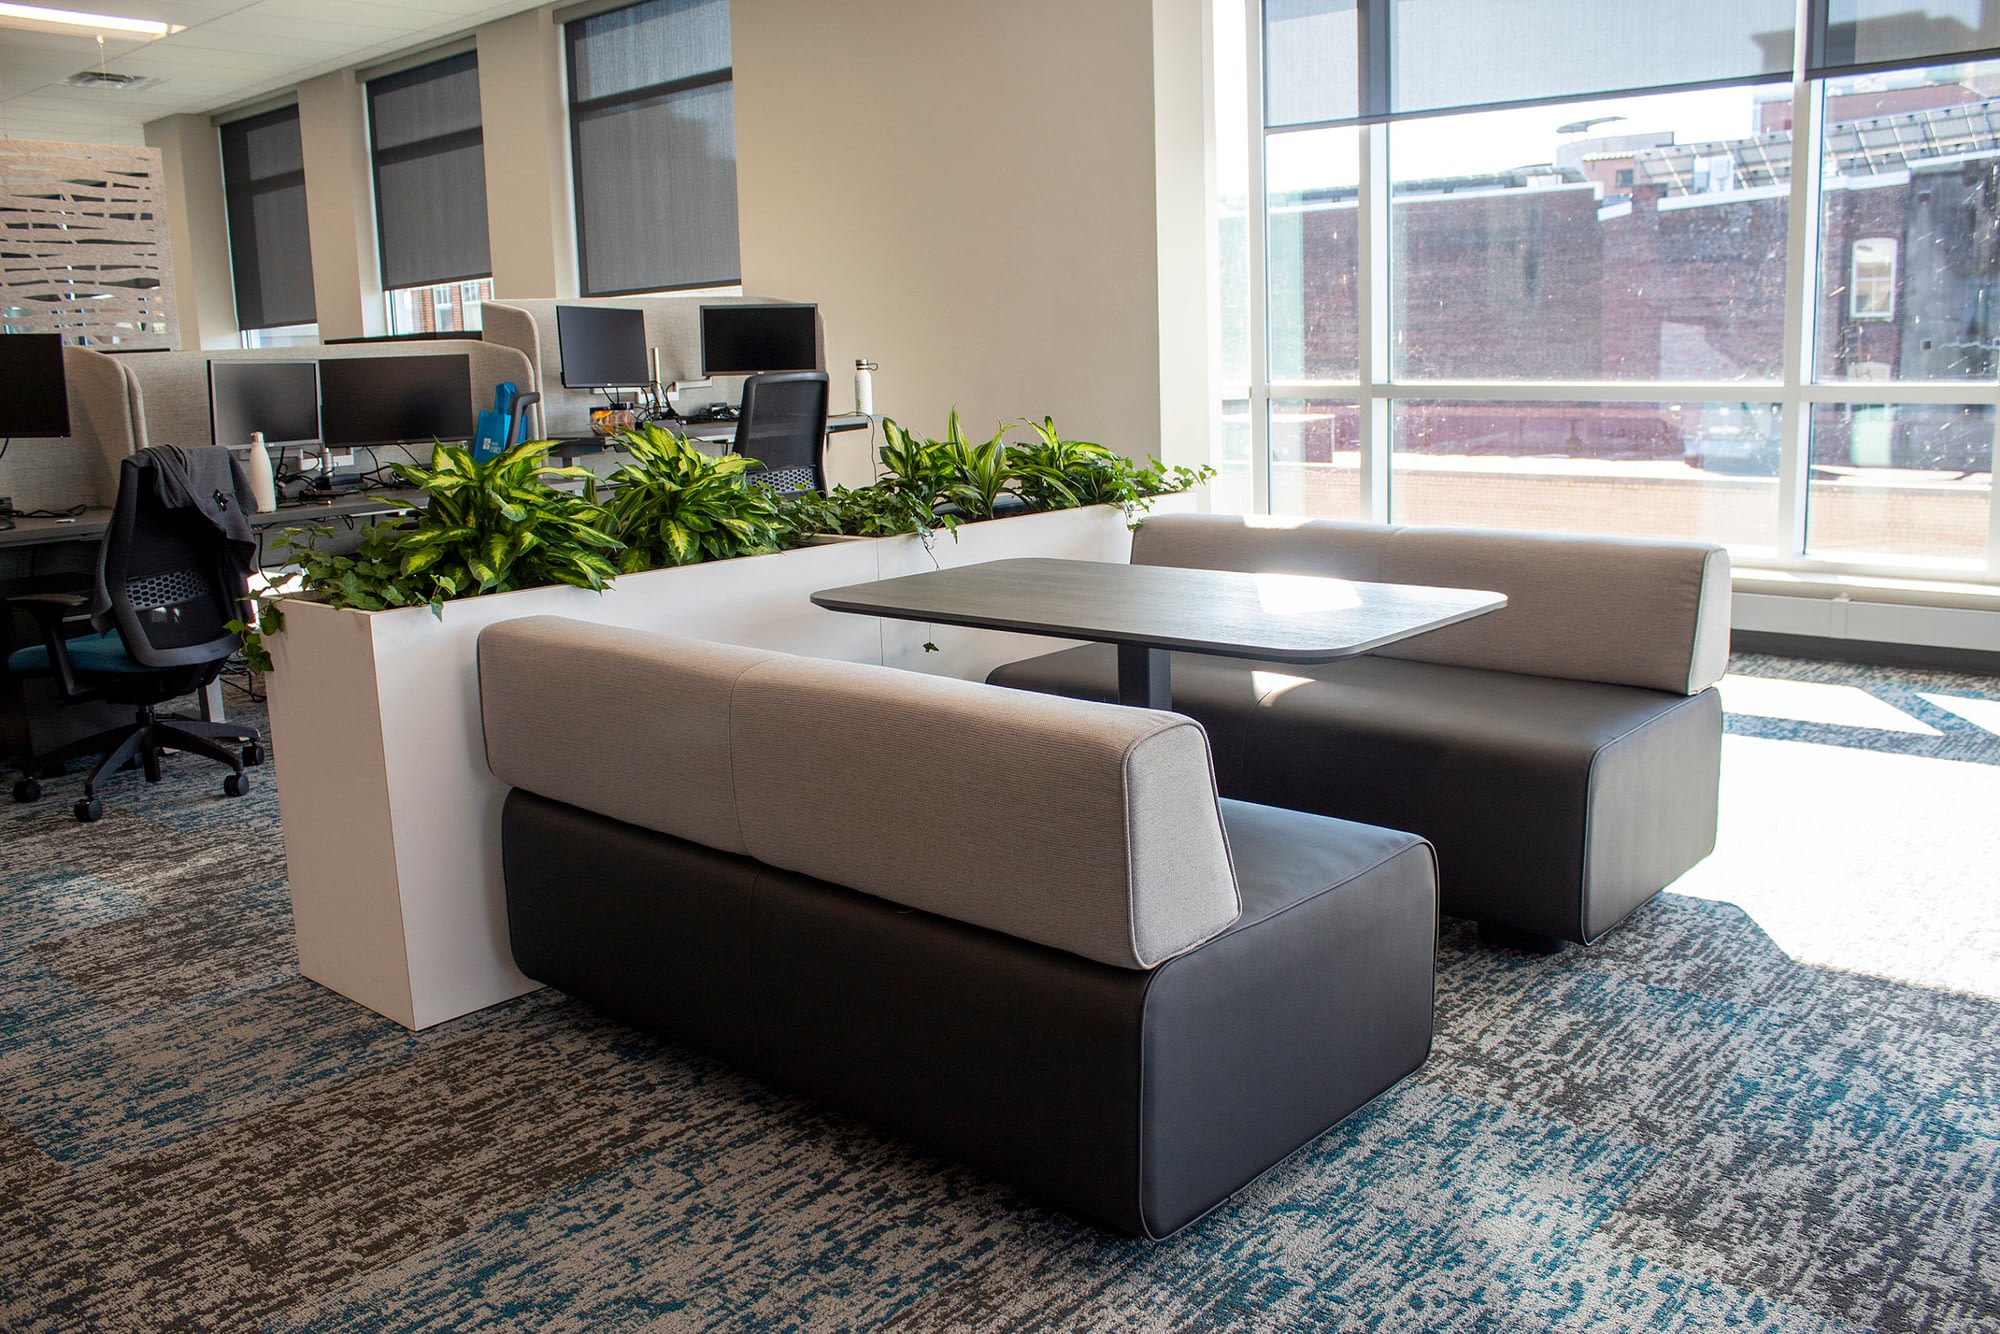 seating area with table and planters